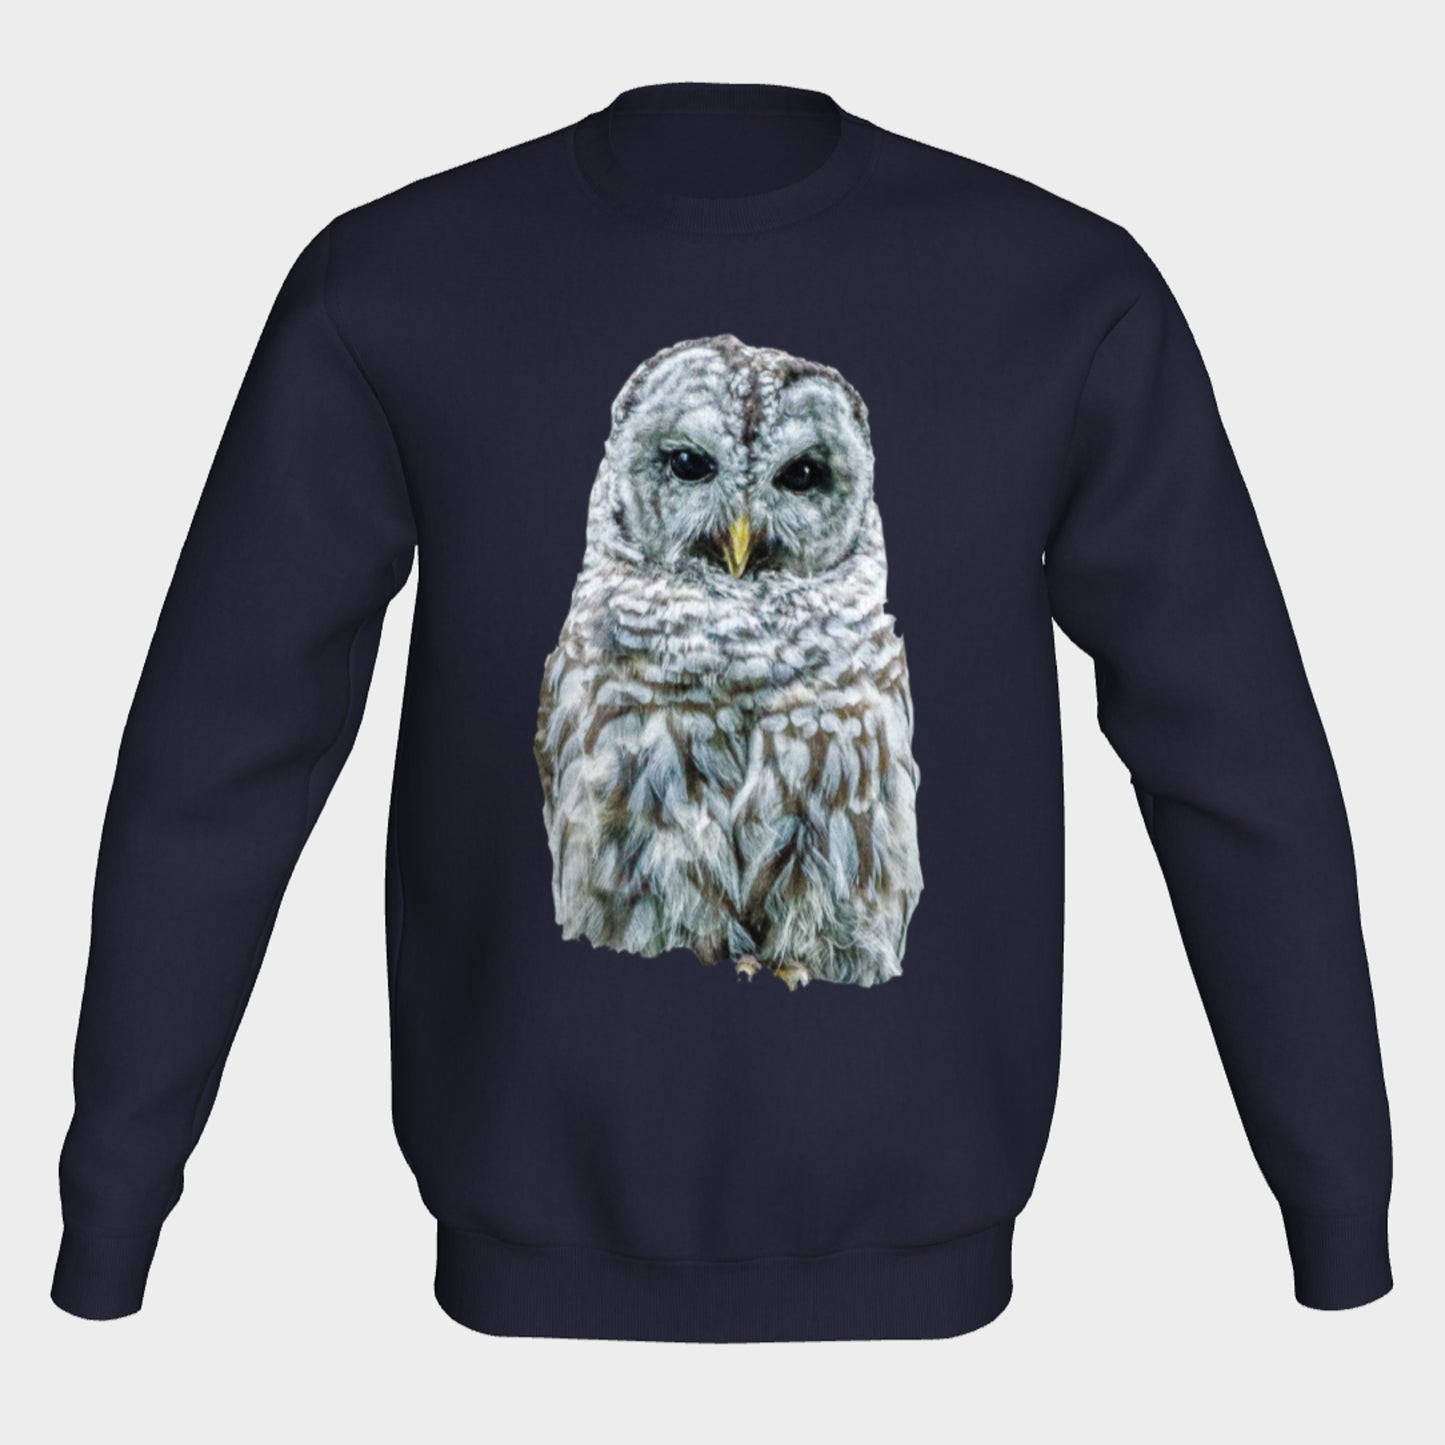 Wise Owl Crewneck Sweatshirt What’s better than a super cozy sweatshirt? A super cozy sweatshirt from Van Isle Goddess!  Super cozy unisex sweatshirt for those chilly days.  Excellent for men or women.   Fit is roomy and comfortable. 